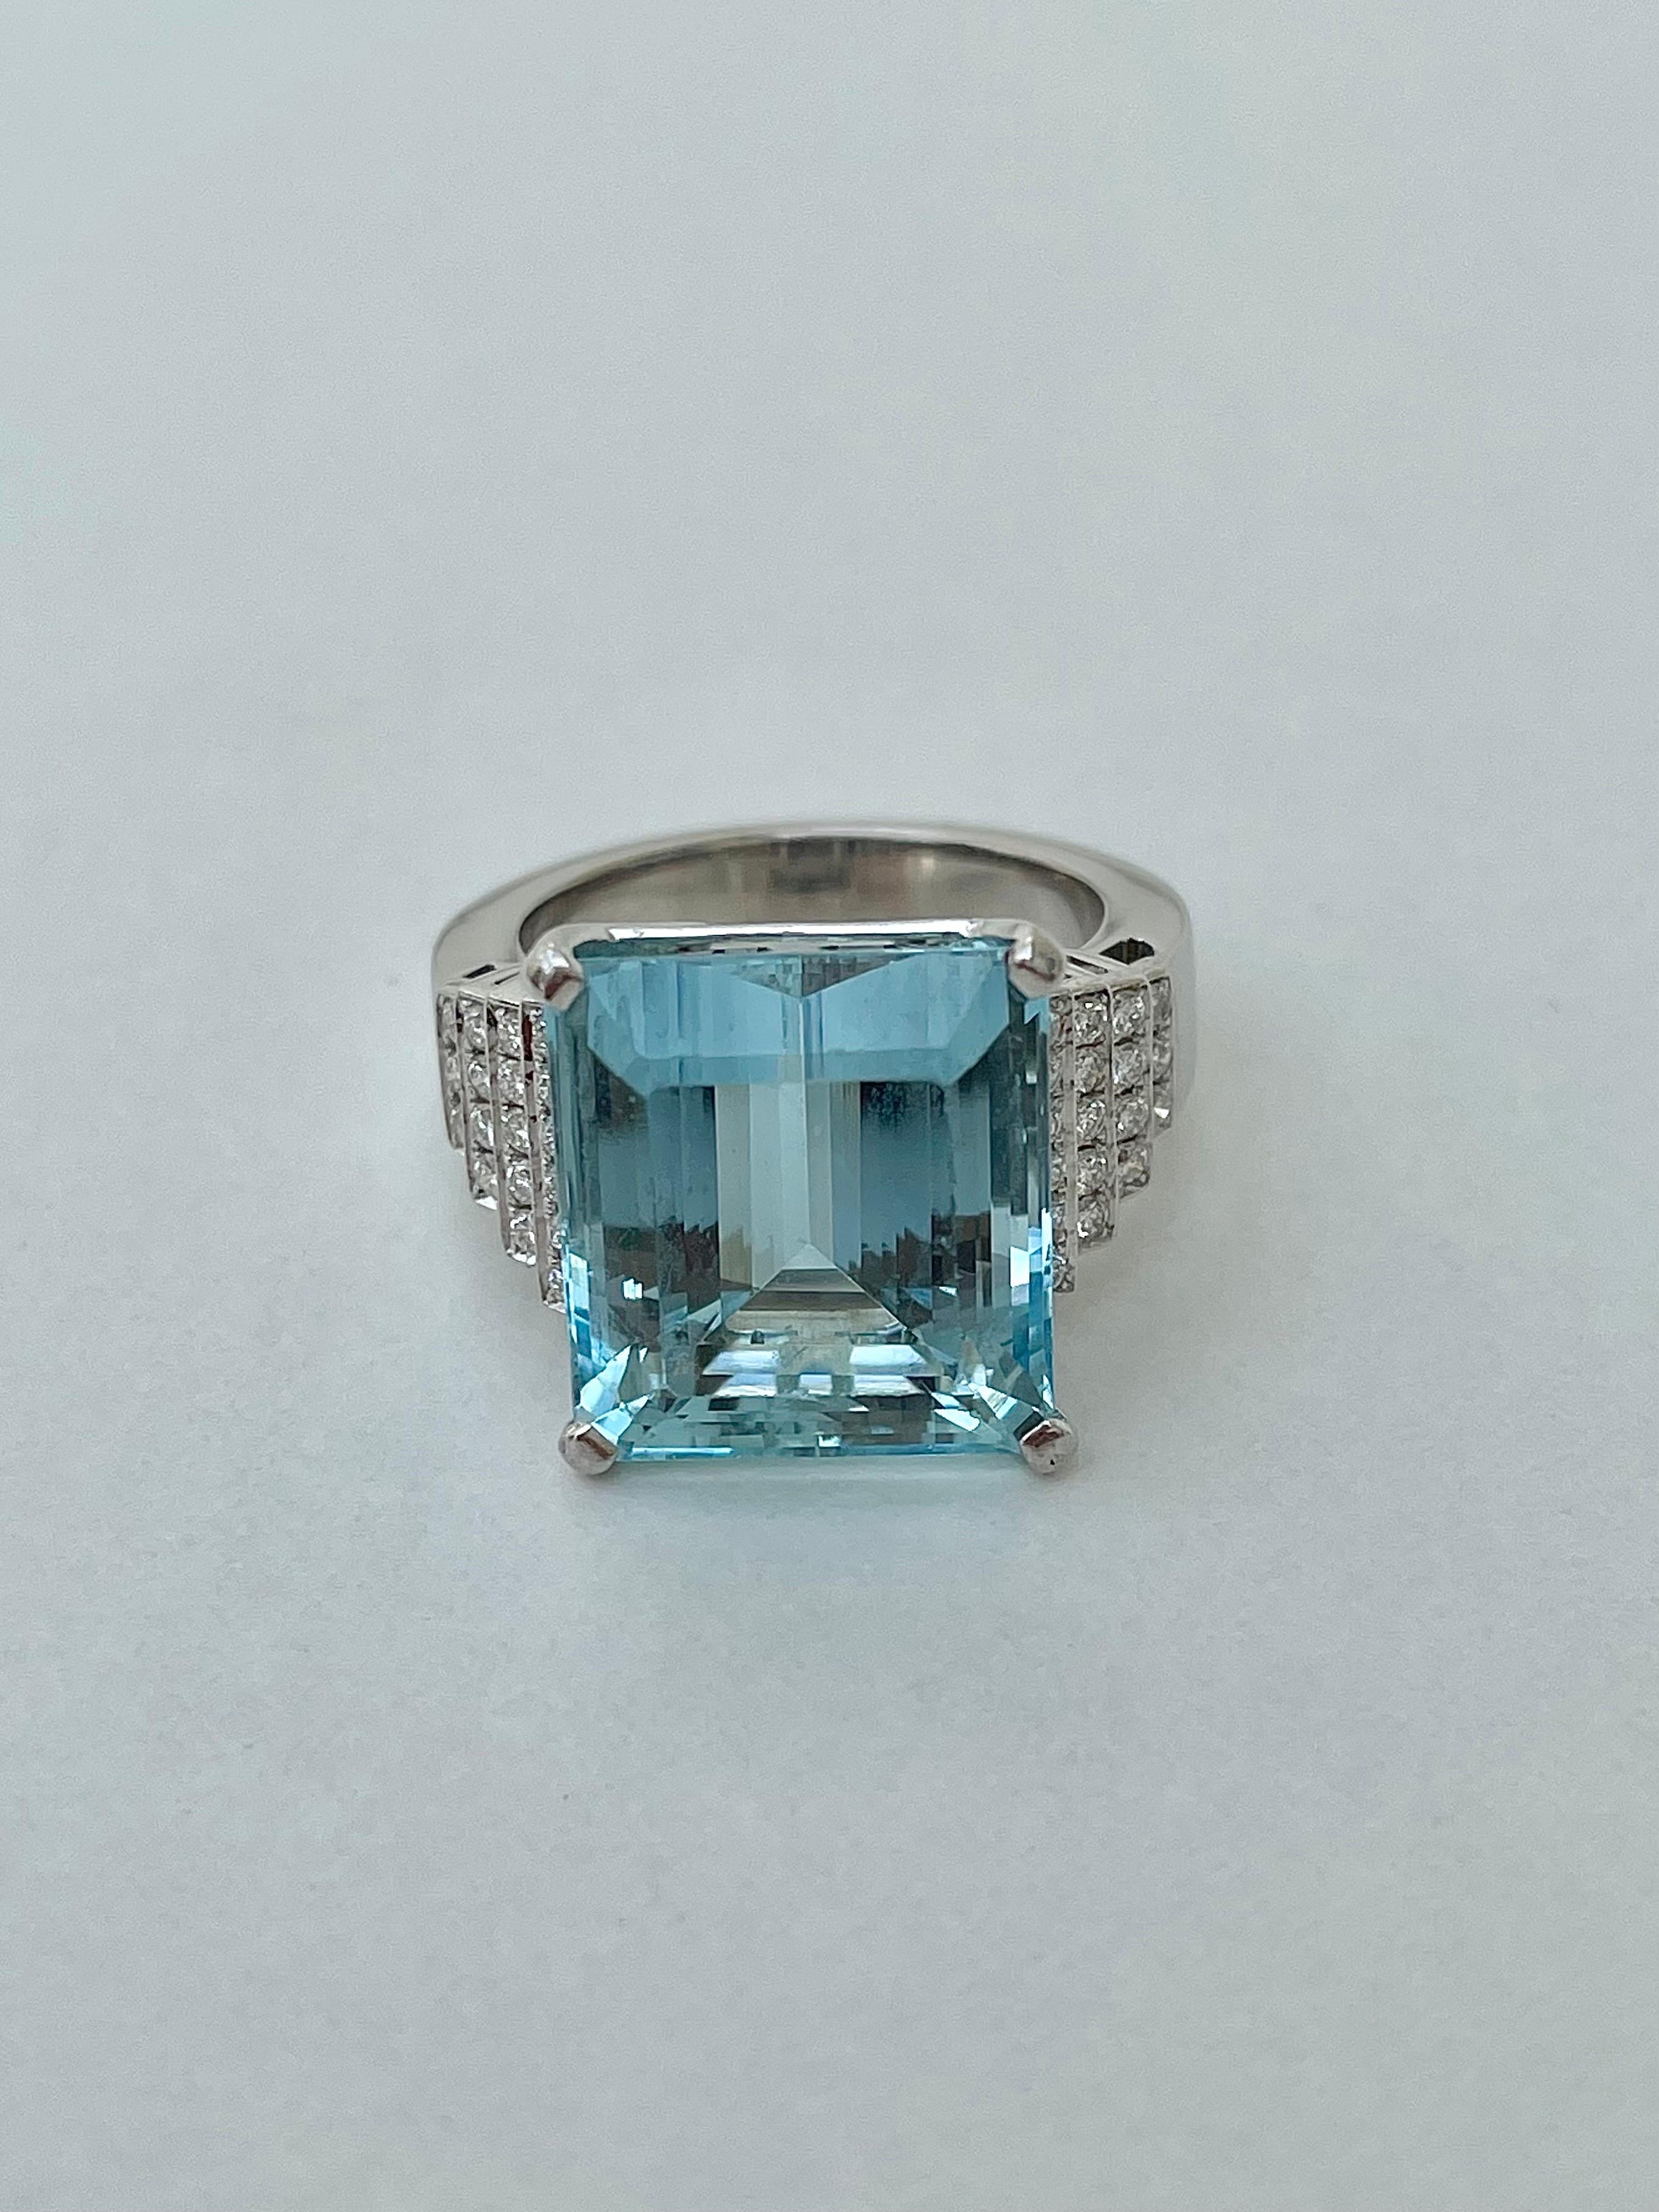 Insane Vintage 18ct White Gold Aquamarine and Diamond Cocktail Ring

the most outstanding chunky aquamarine stone with the most wonderful diamond shoulders! perfect statement ring!

The item comes without the box in the photos but will be presented